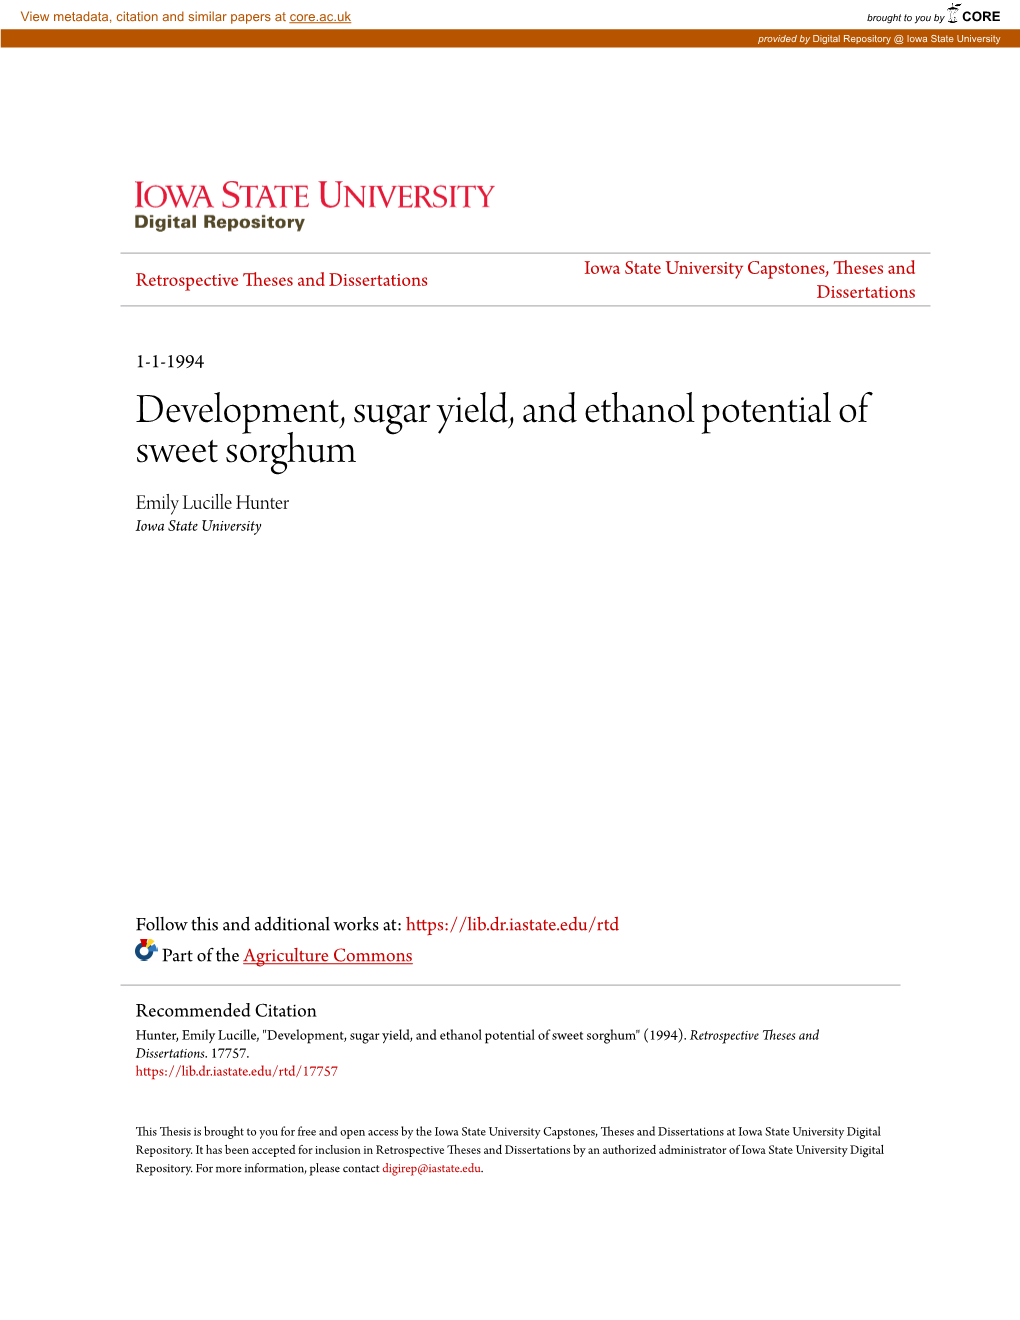 Development, Sugar Yield, and Ethanol Potential of Sweet Sorghum Emily Lucille Hunter Iowa State University